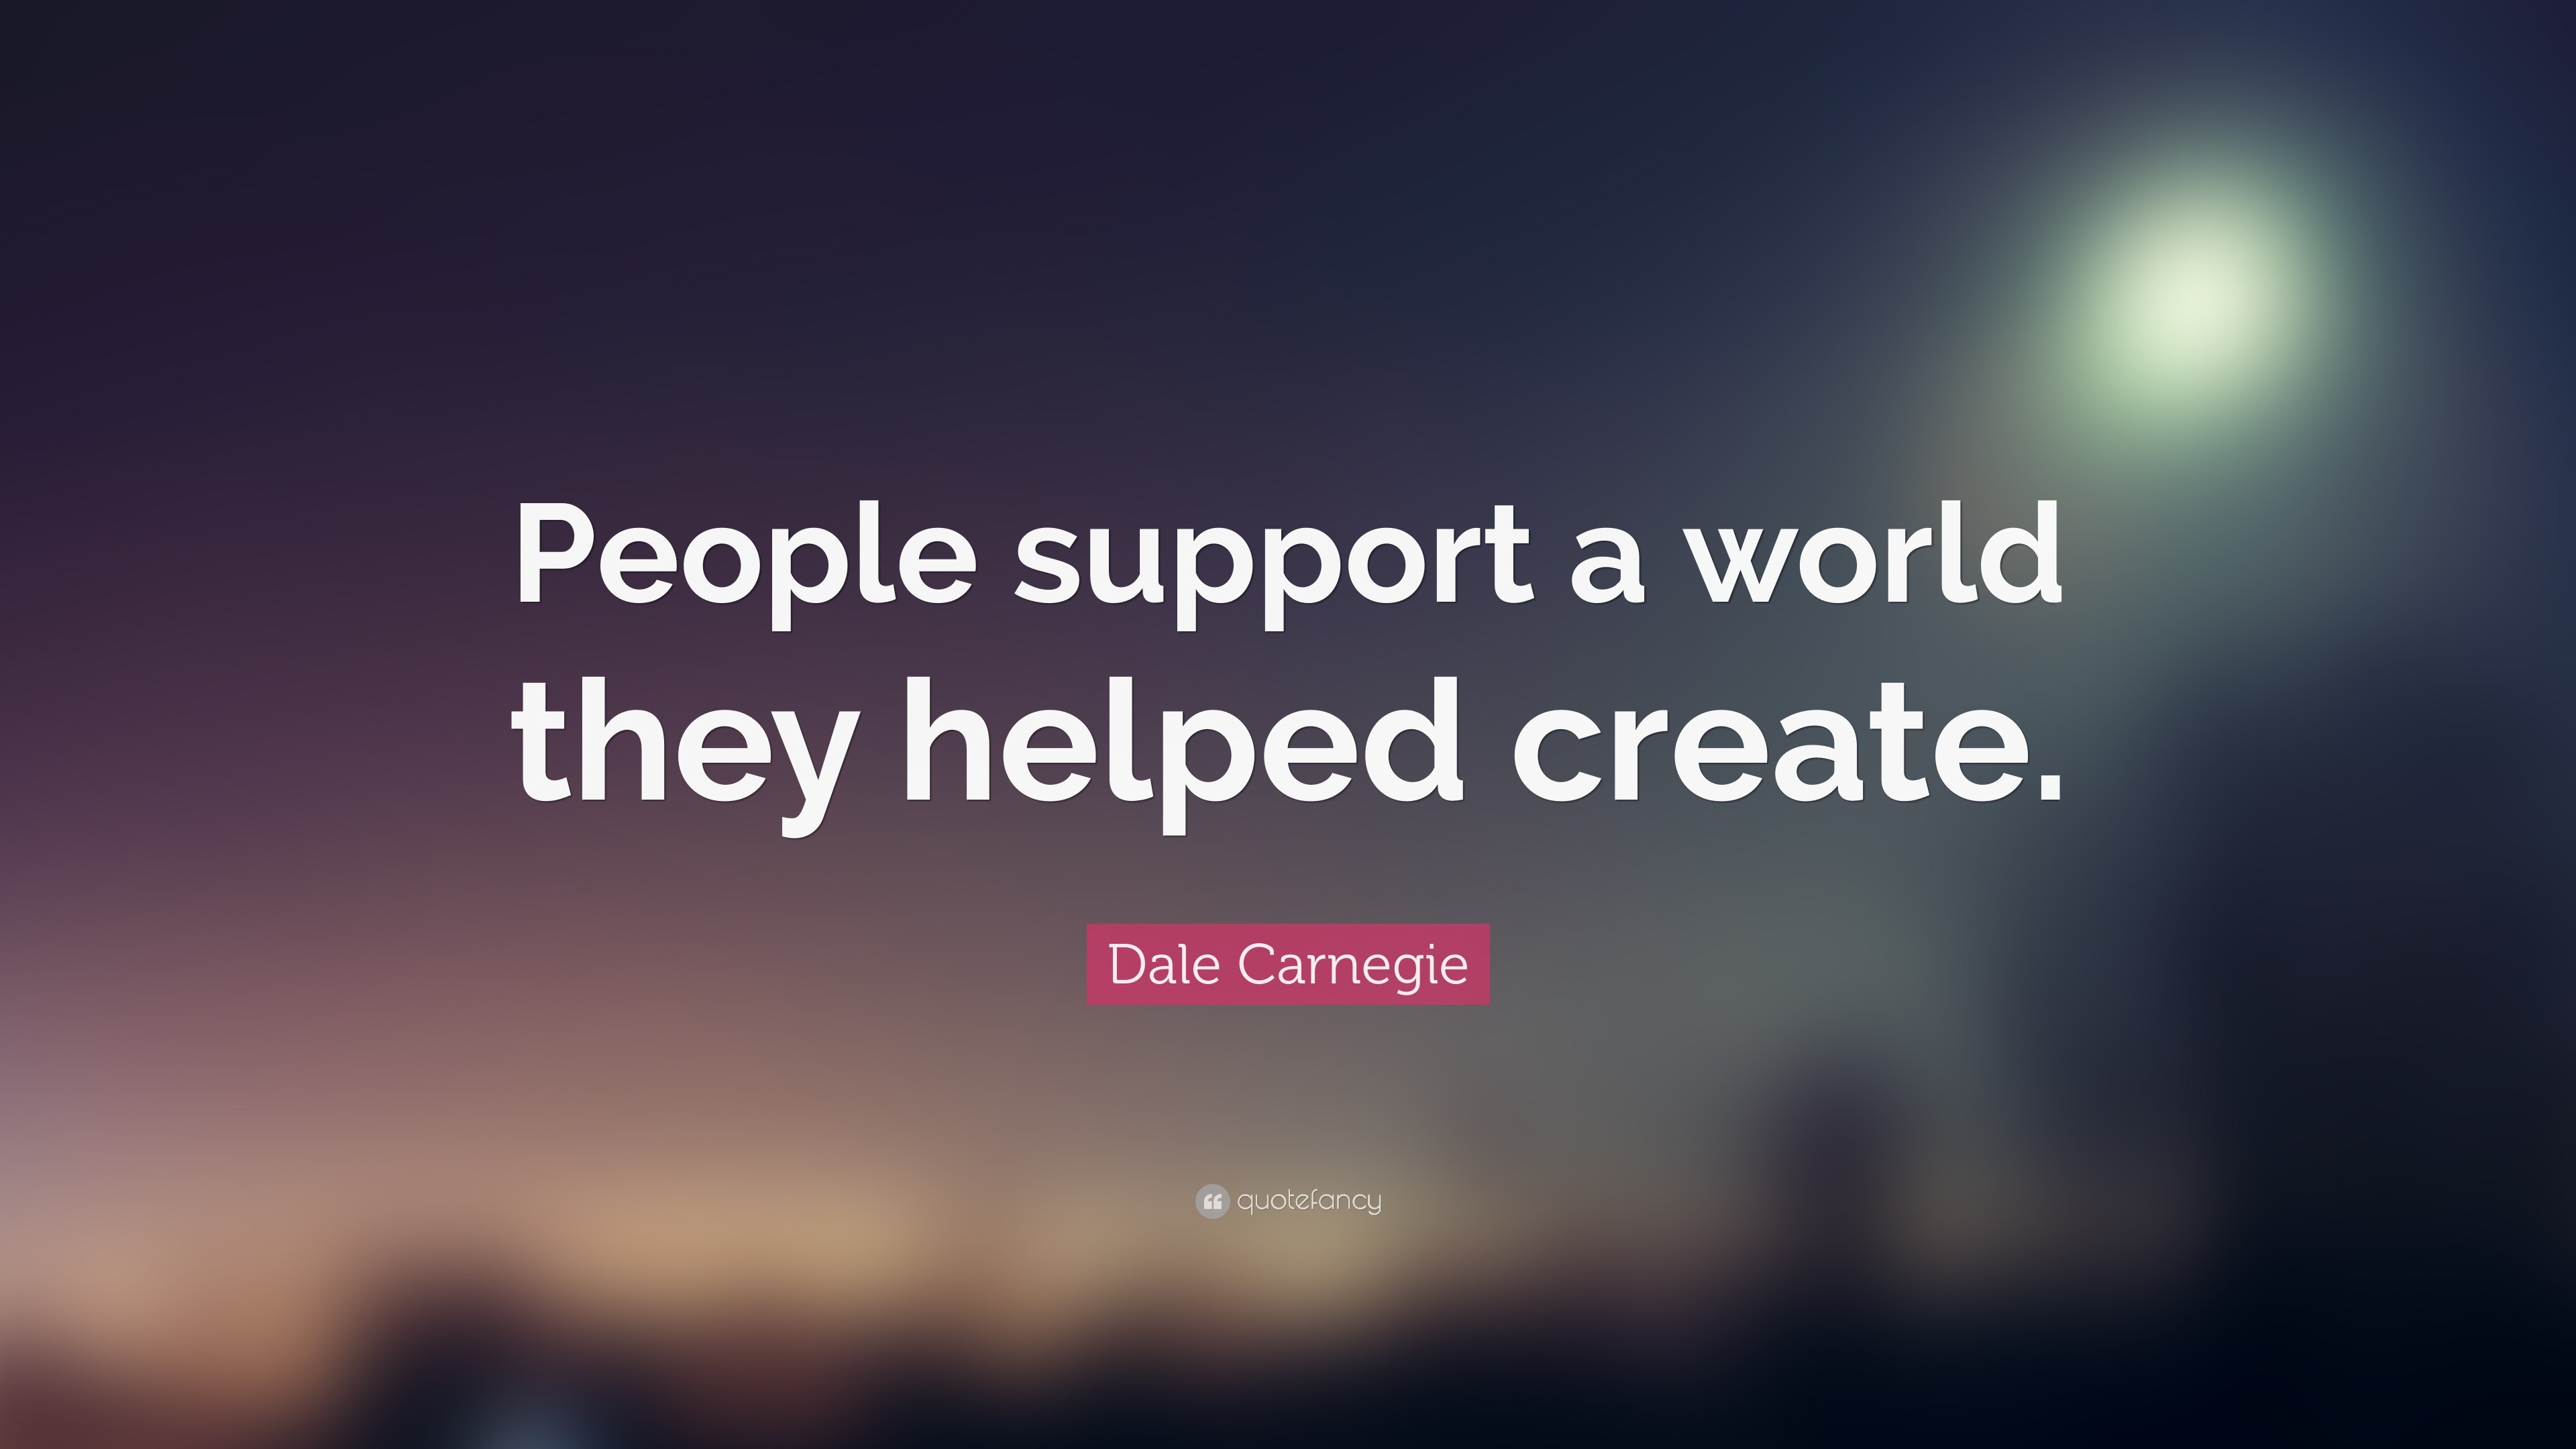 Dale Carnegie Quote: “People support a world they helped create.”